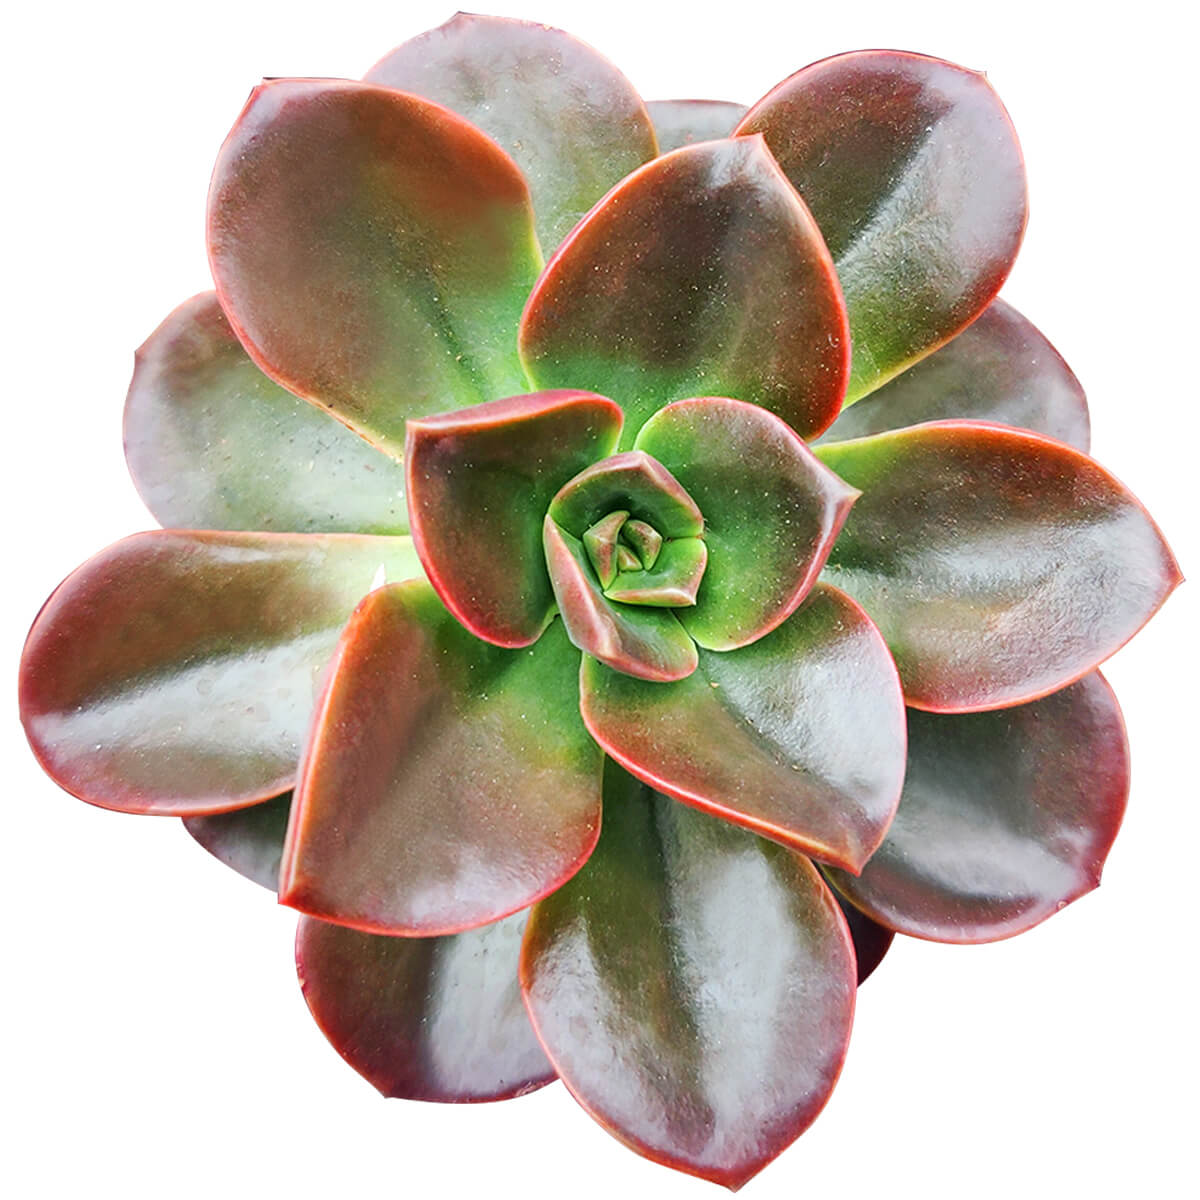 Echeveria Melaco for sale, how to grow succulents, succulents store in CA, succulent care, monthly succulents, Succulents shop near me, Succulents, succulent care guide, Rare succulents, Echeveria Melaco in California, How to grow Echeveria Melaco, How to care echeveria succulents for thanksgiving, Easter echeveria gift, echeveria, echeveria succulent, echeveria types, succulent echeveria, buy succulents online, succulent shop, succulent store, echeveria plant, indoor succulents